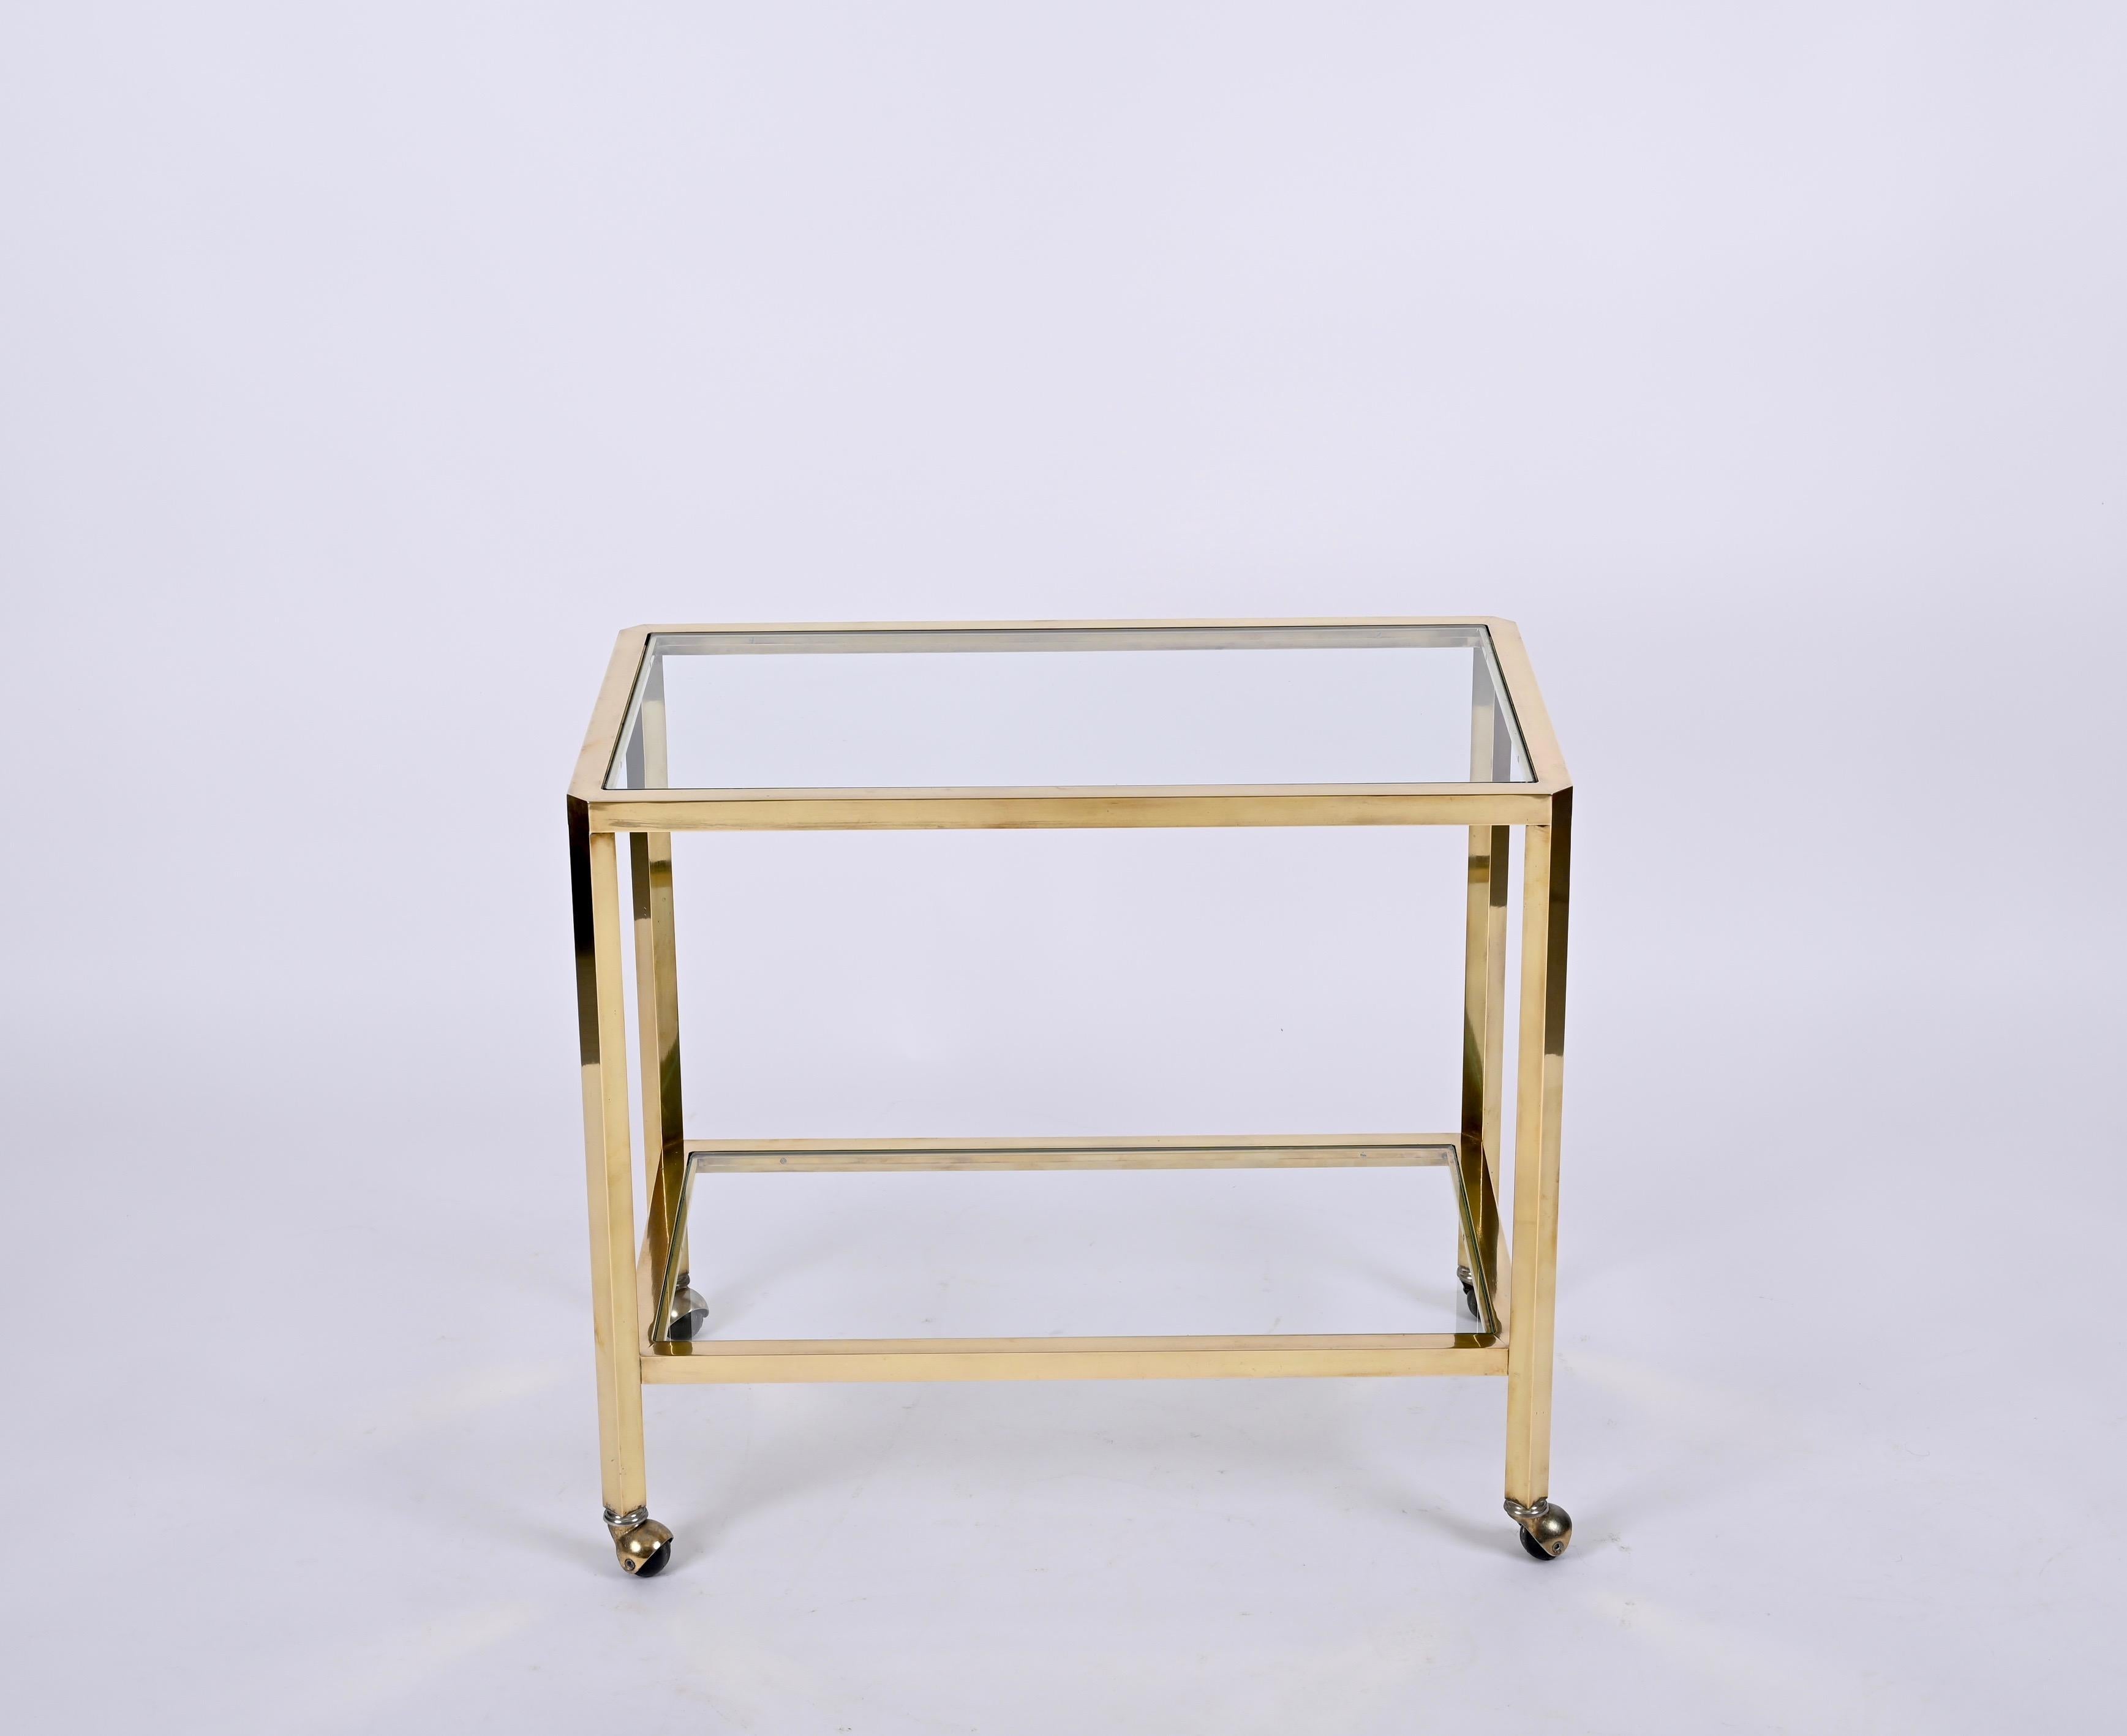 Exceptional two level mid-century service cart in brass. This gorgeous piece was produced in Italy during 1970.

This stunning bar cart features a structure made in gold-plated brass and the two original crystal glasses. An incredibly charming